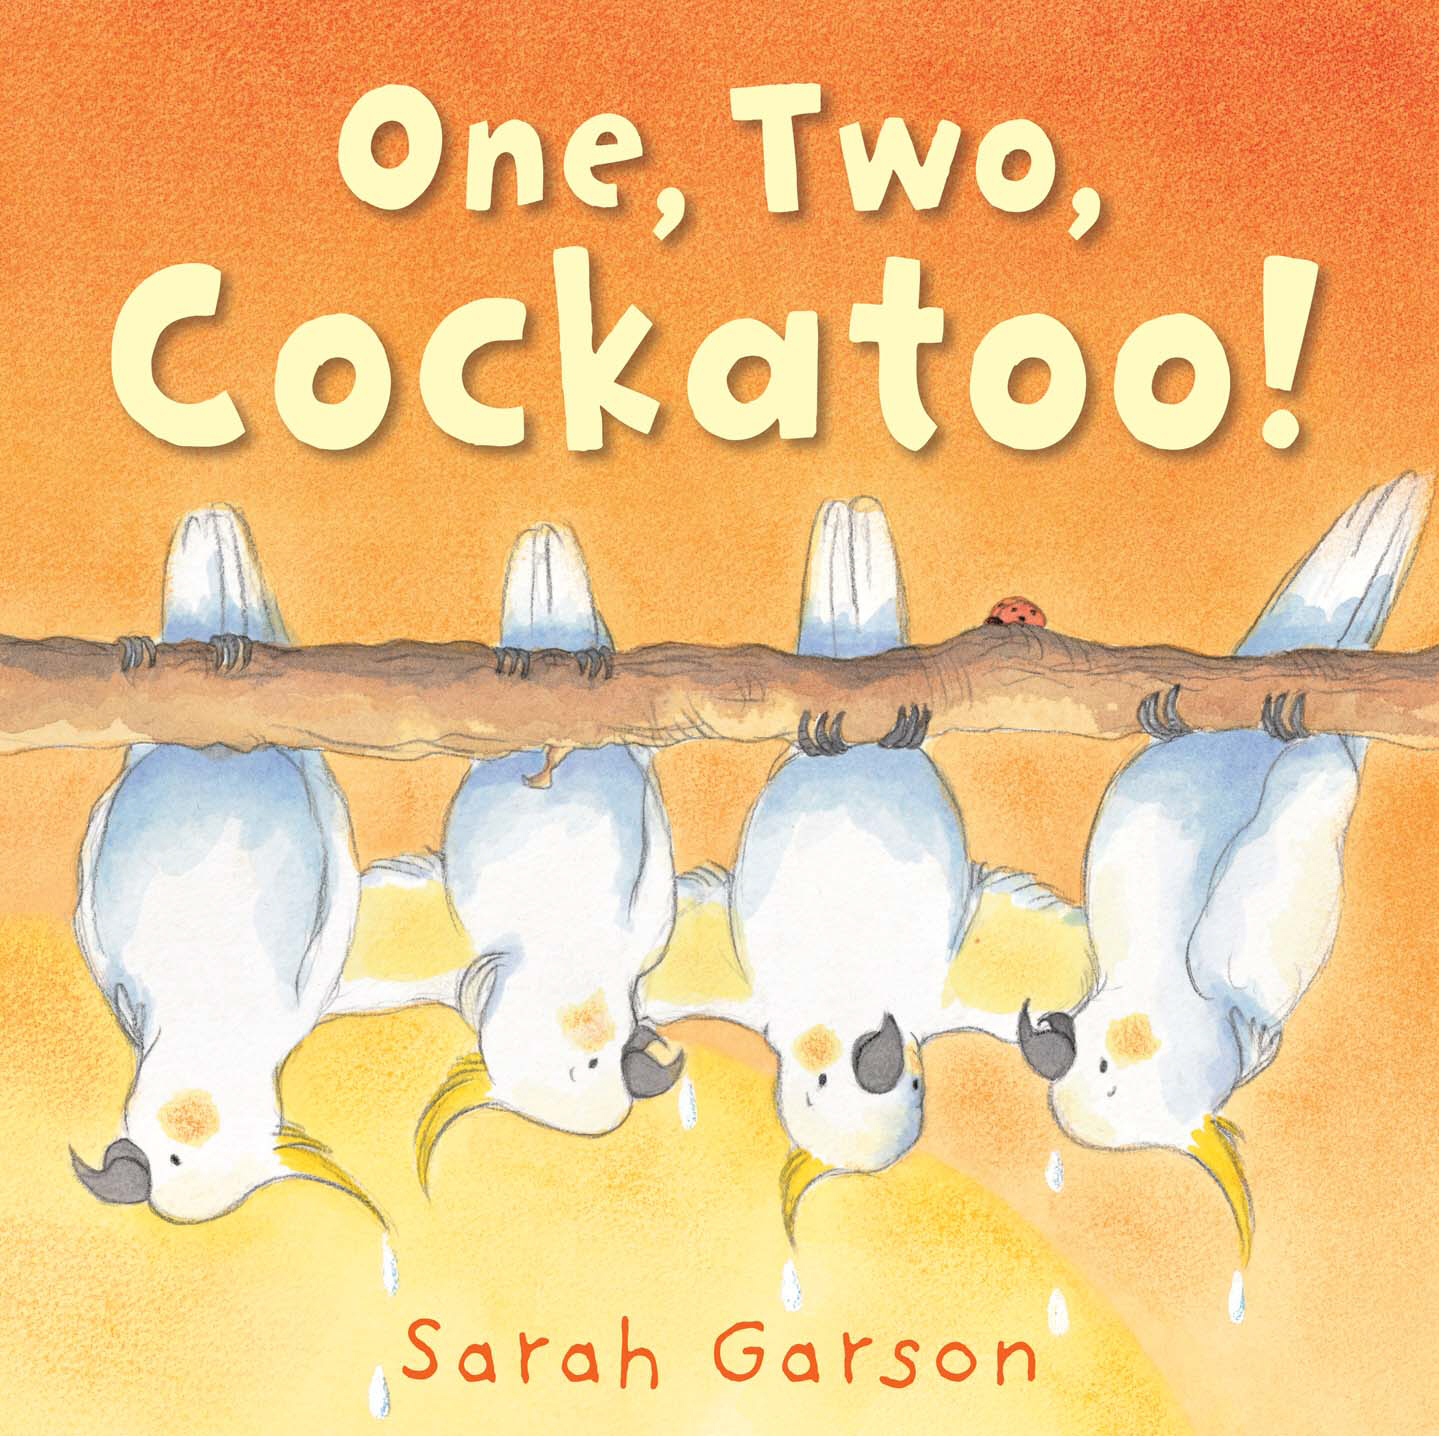 One, Two, Cockatoo!